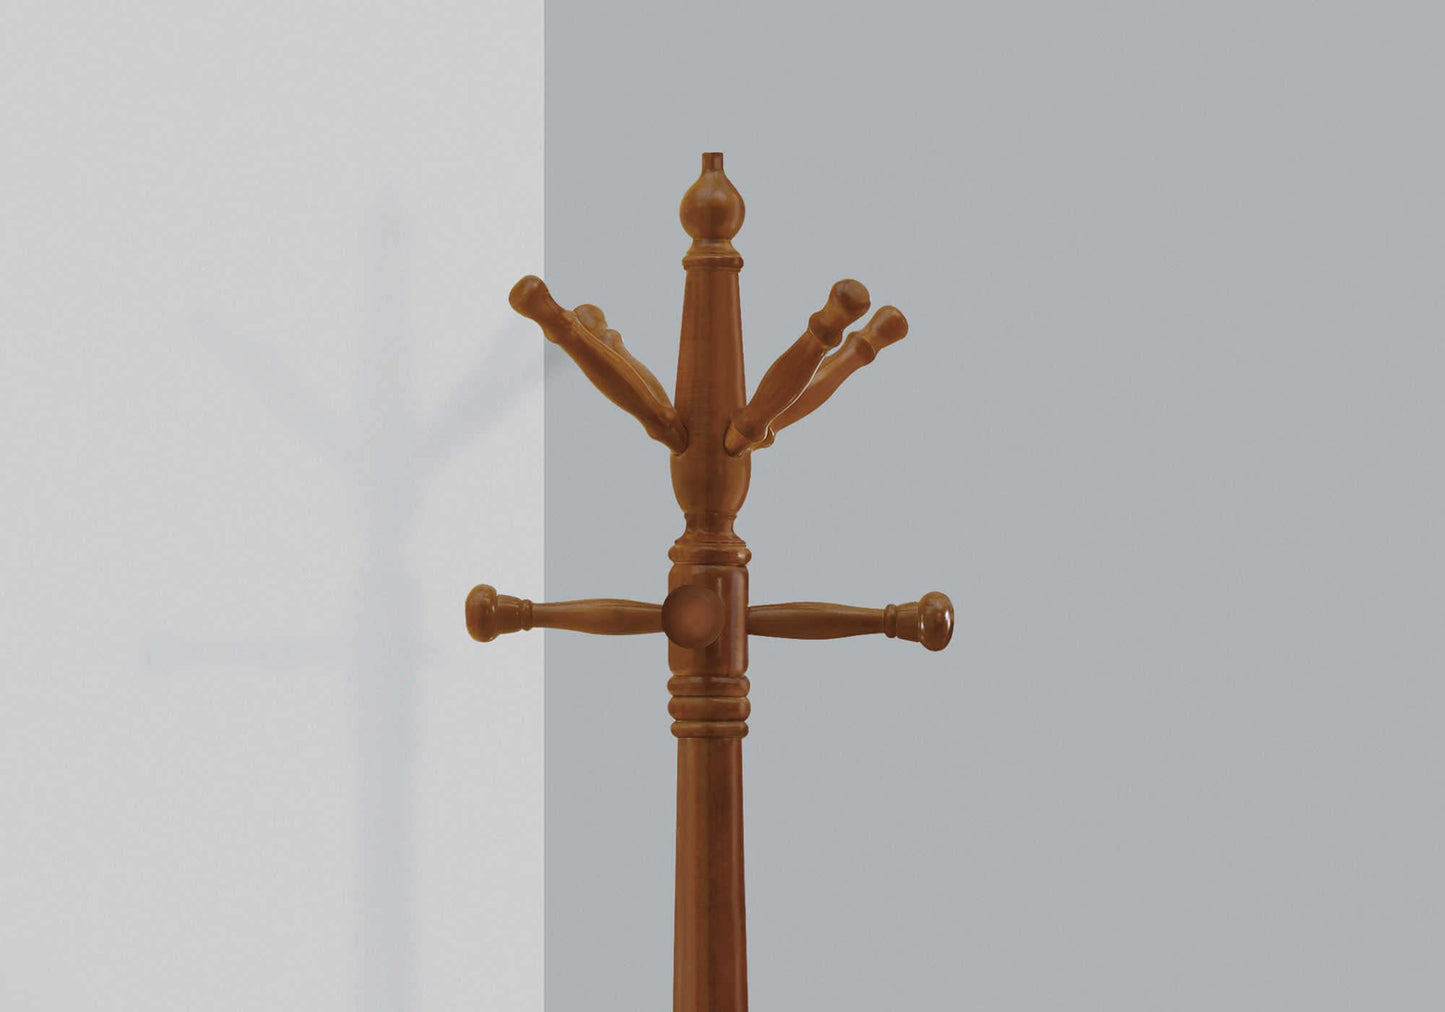 Transitional Traditional 11 Hook Solid Wood Coat Rack in Oak Finish